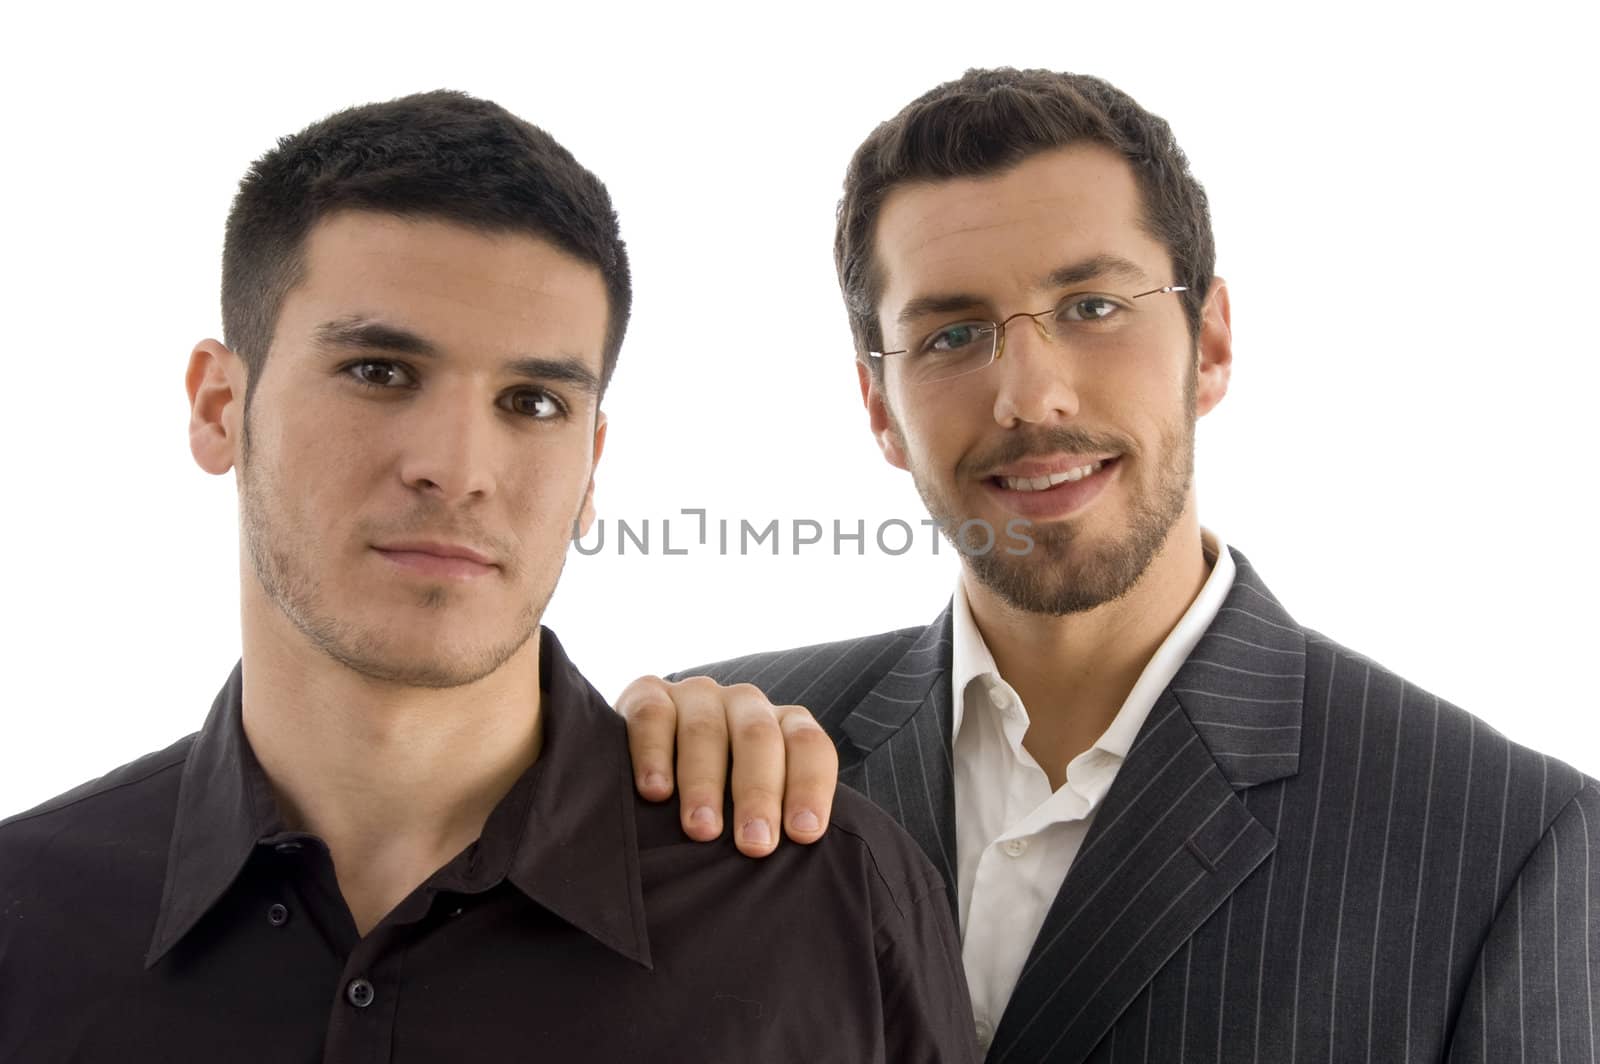 businesspeople standing together and looking at camera on an isolated white background